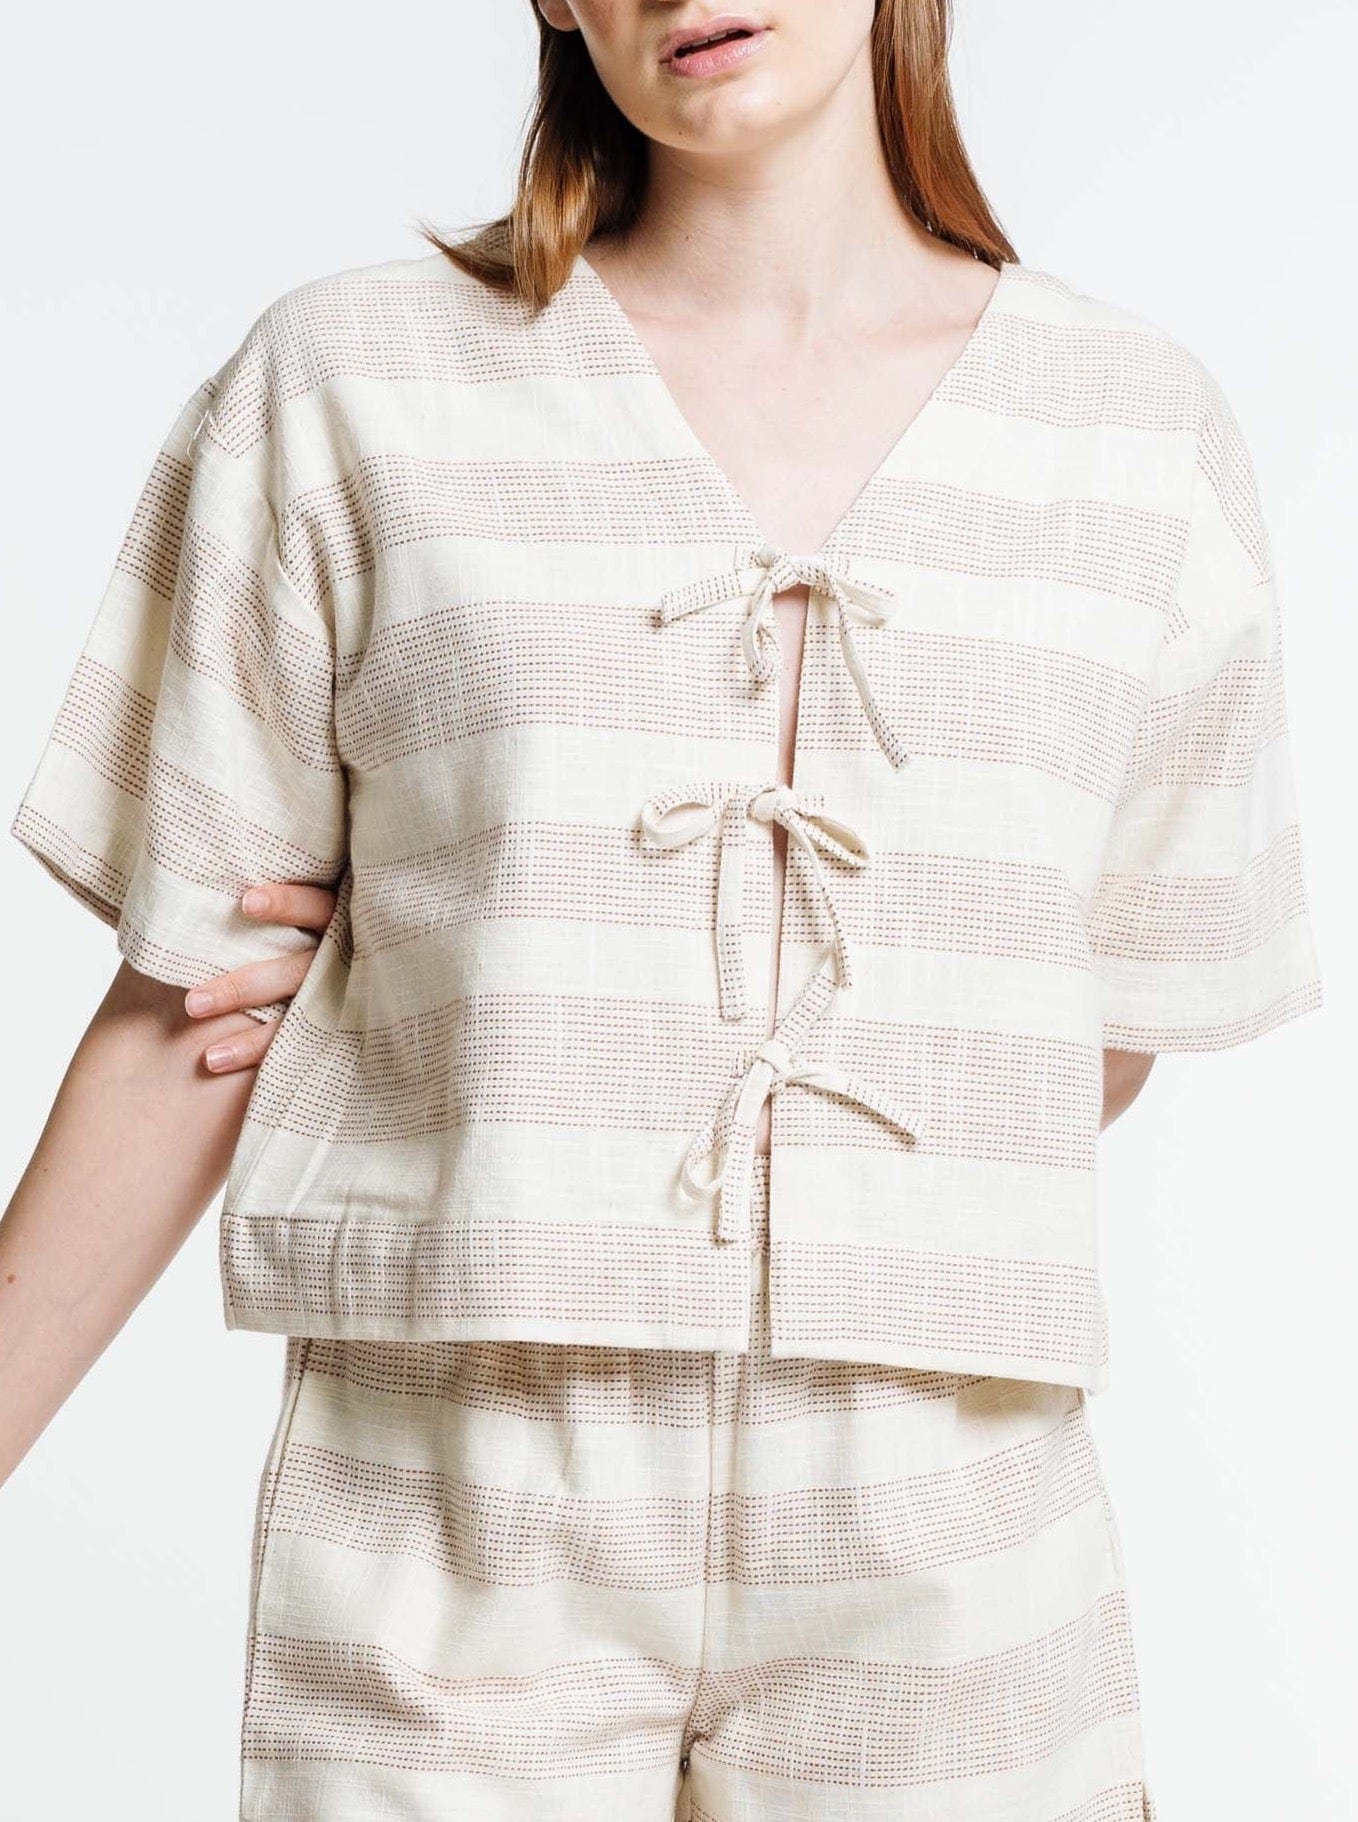 The model is wearing a Baker Top - Terracotta Ticking Stripe and shorts.